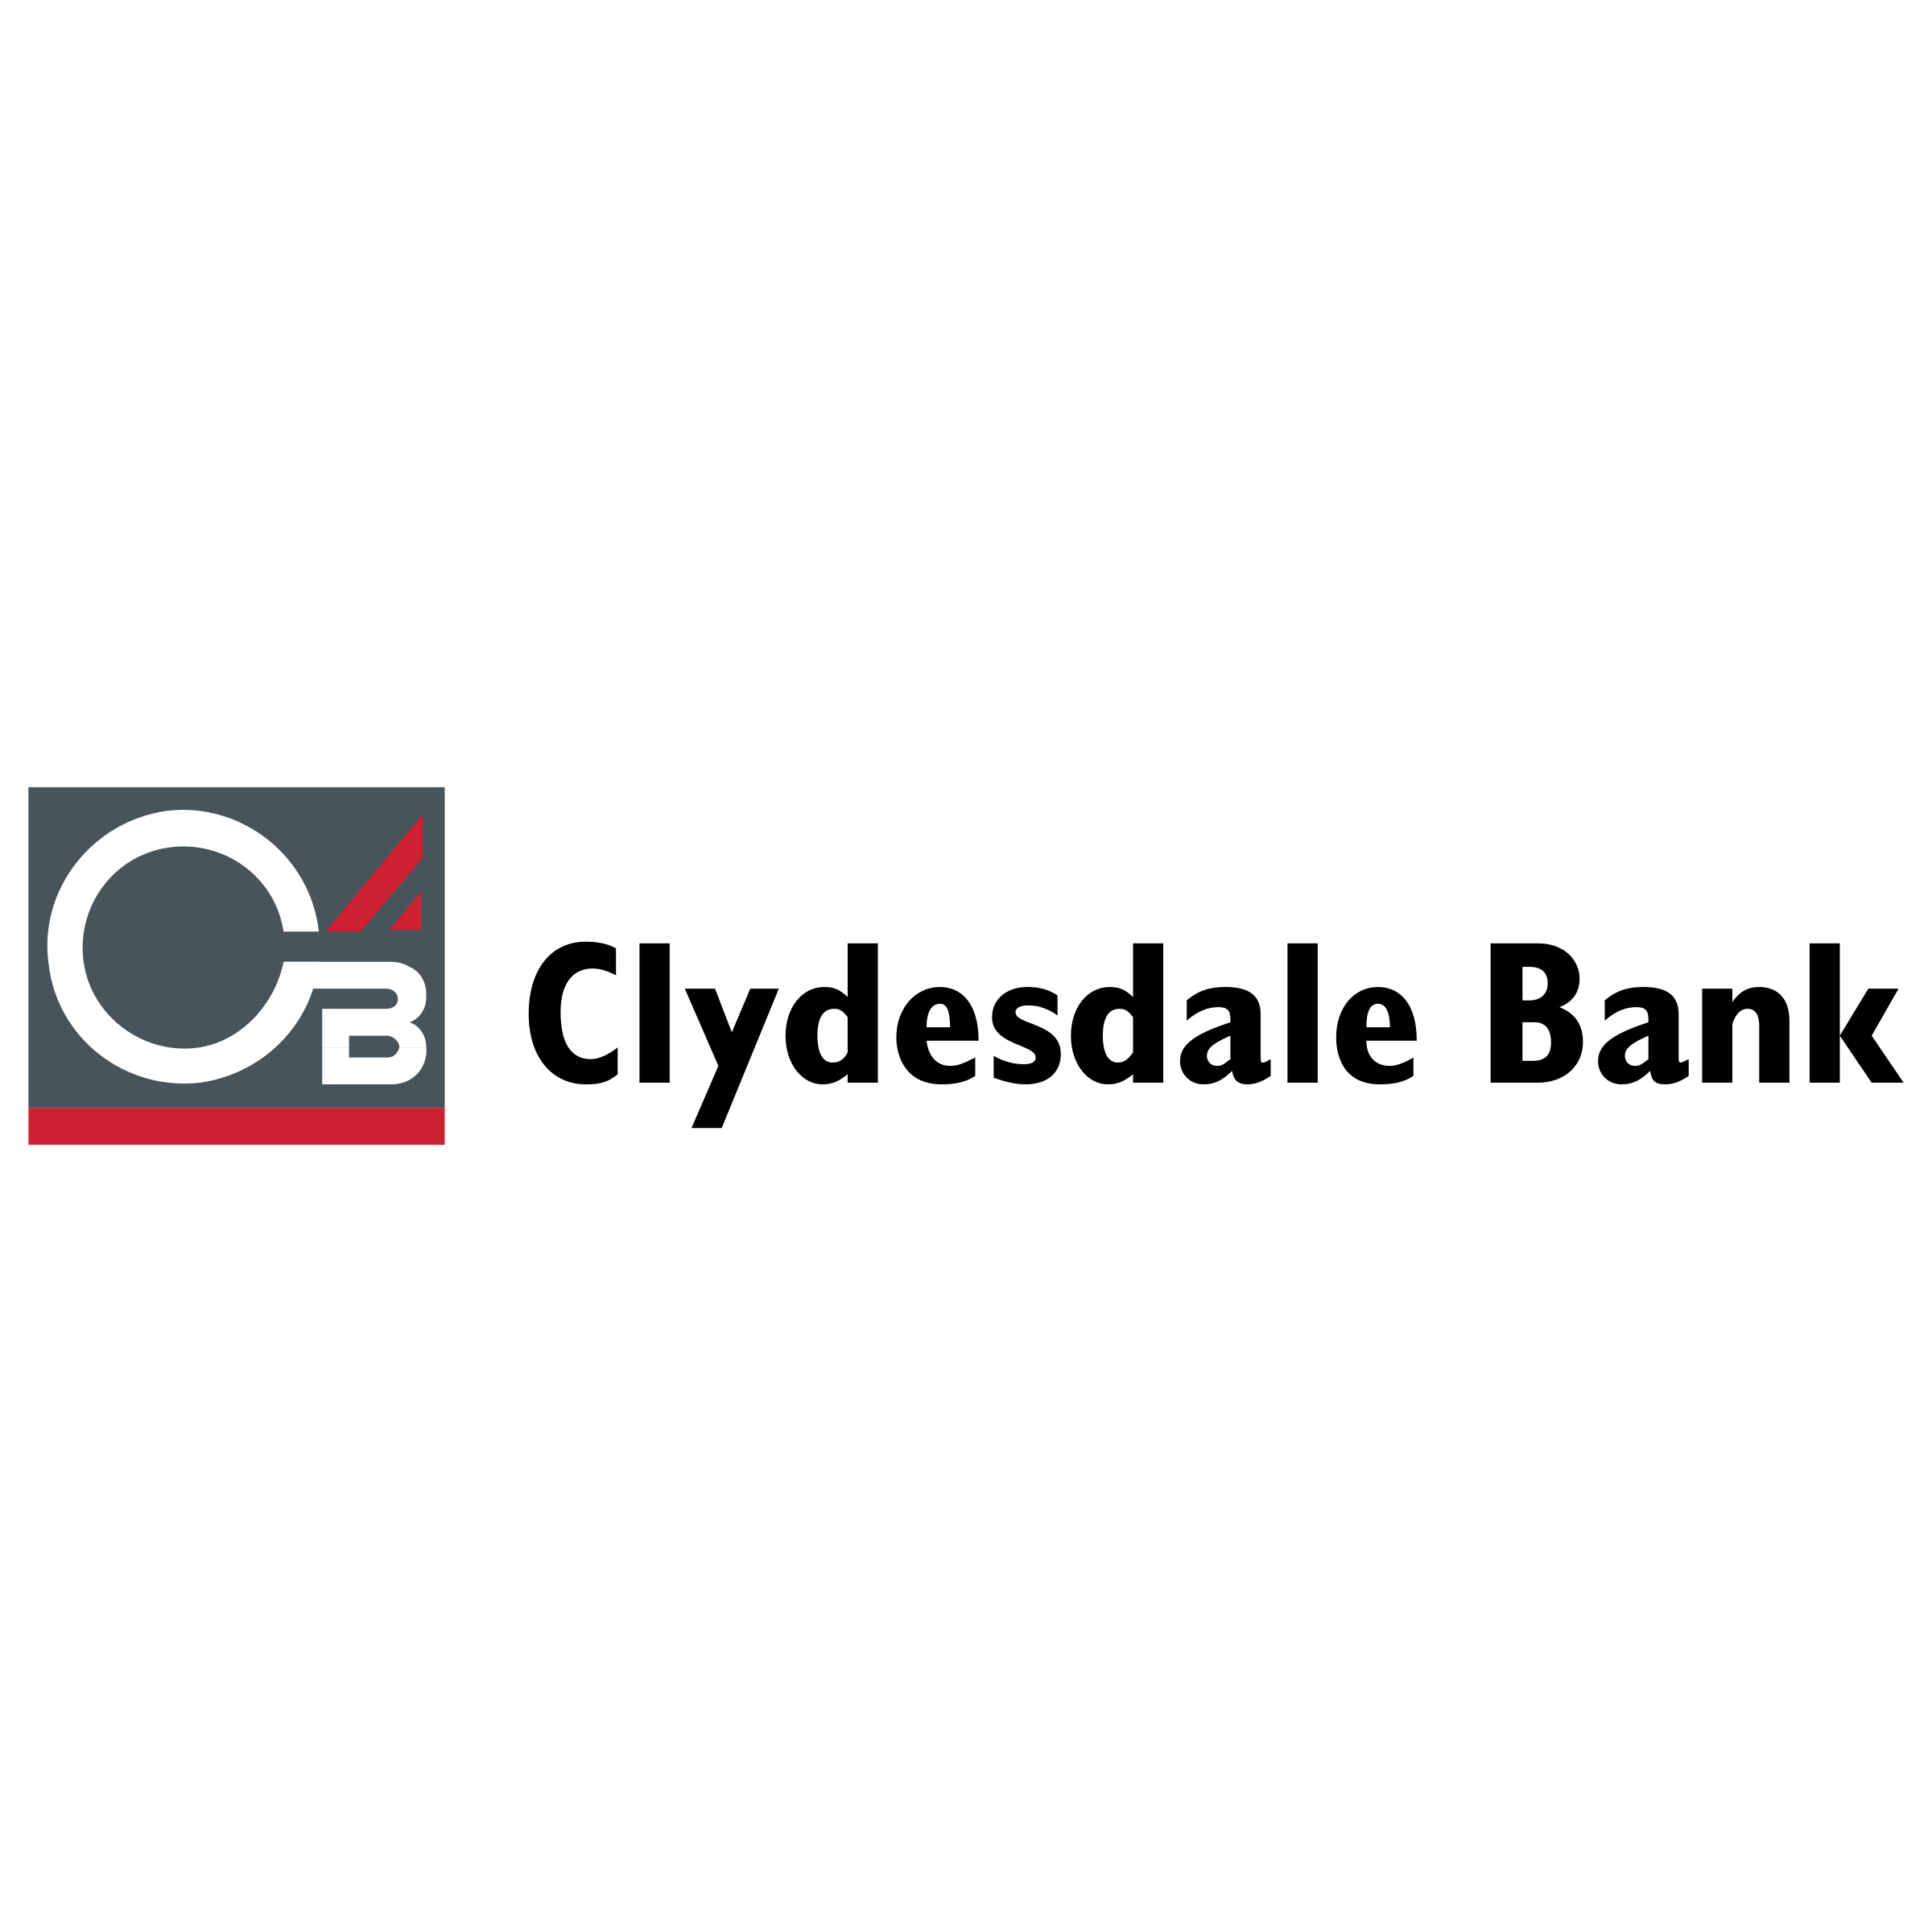 Clydesdale Logo - Clydesdale Bank Logo PNG Transparent & SVG Vector - Freebie Supply